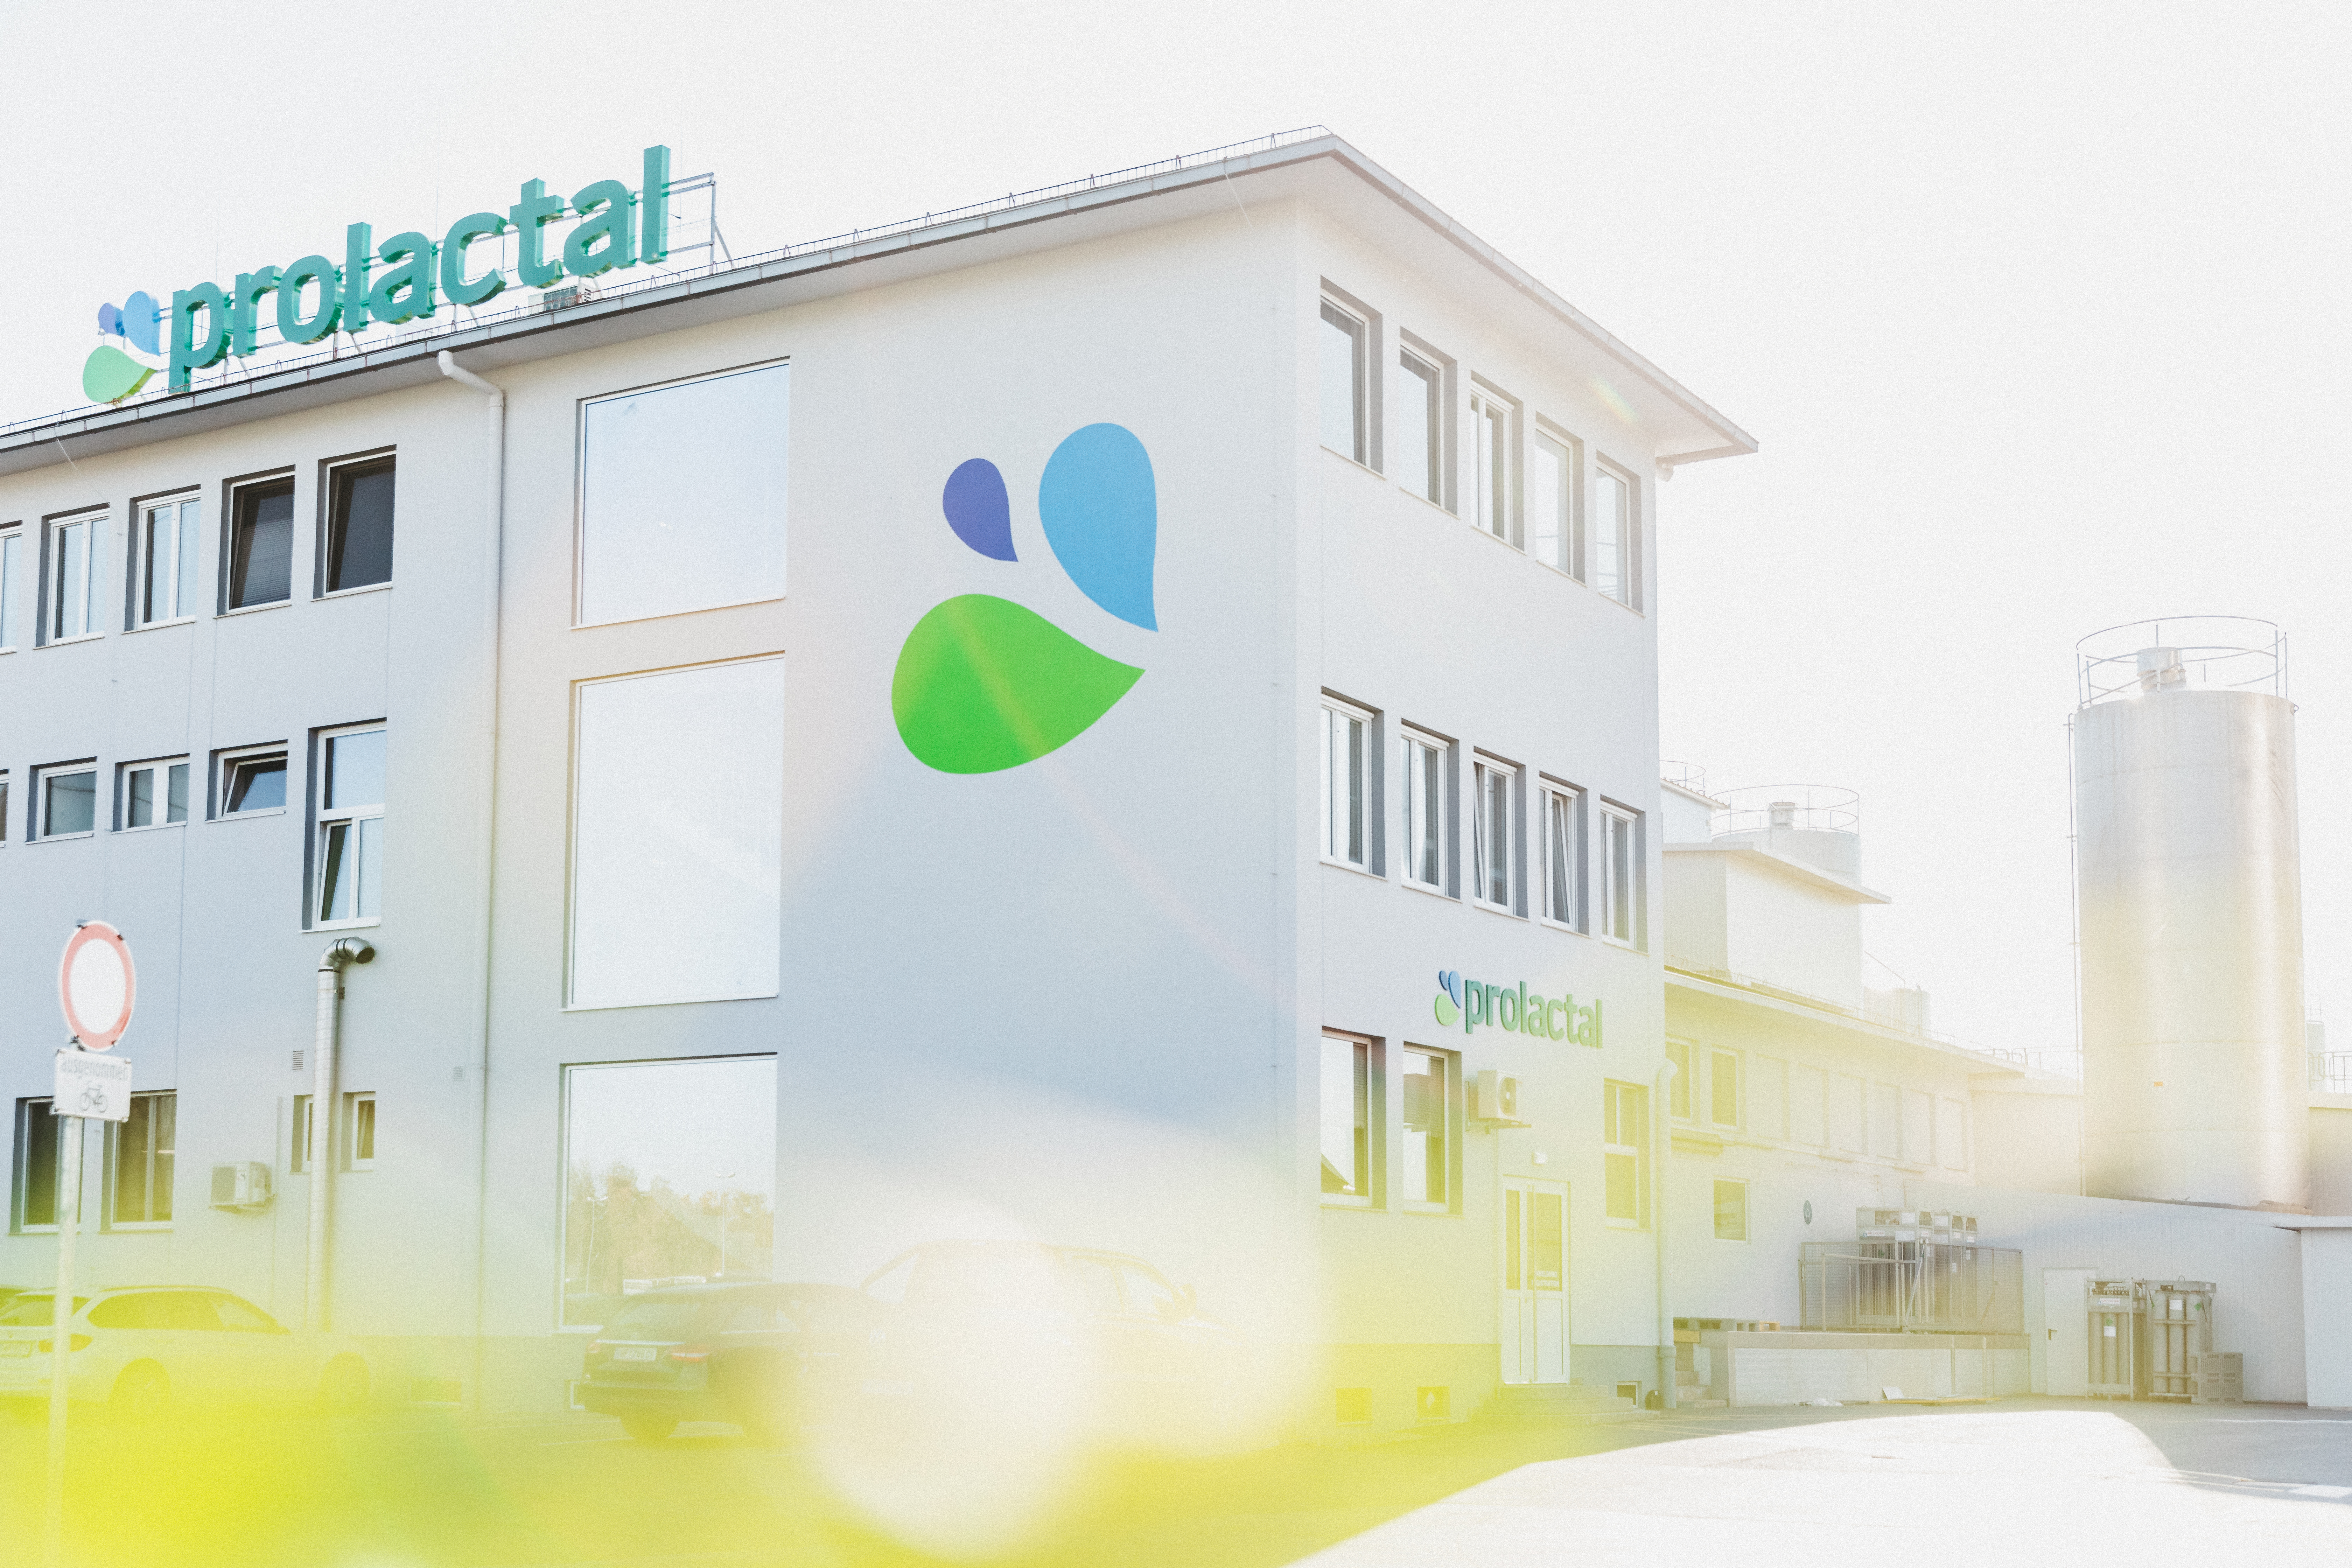 Prolactal Expands Efforts to Reduce Greenhouse Gas Emissions for its Organic Milk Derivatives